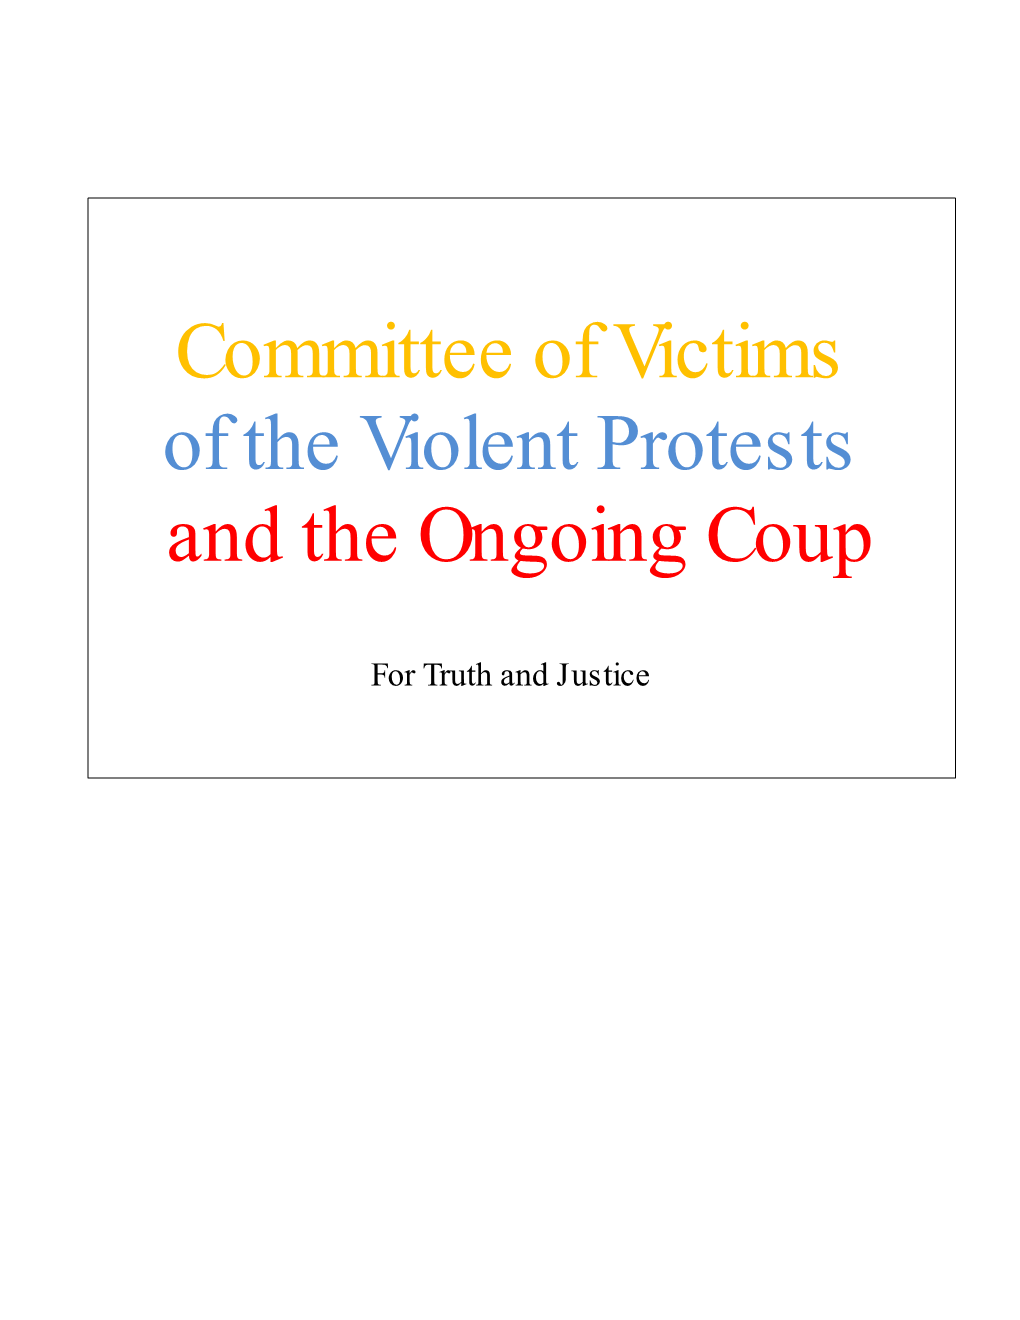 Committee of Victims of the Violent Protests and the Ongoing Coup